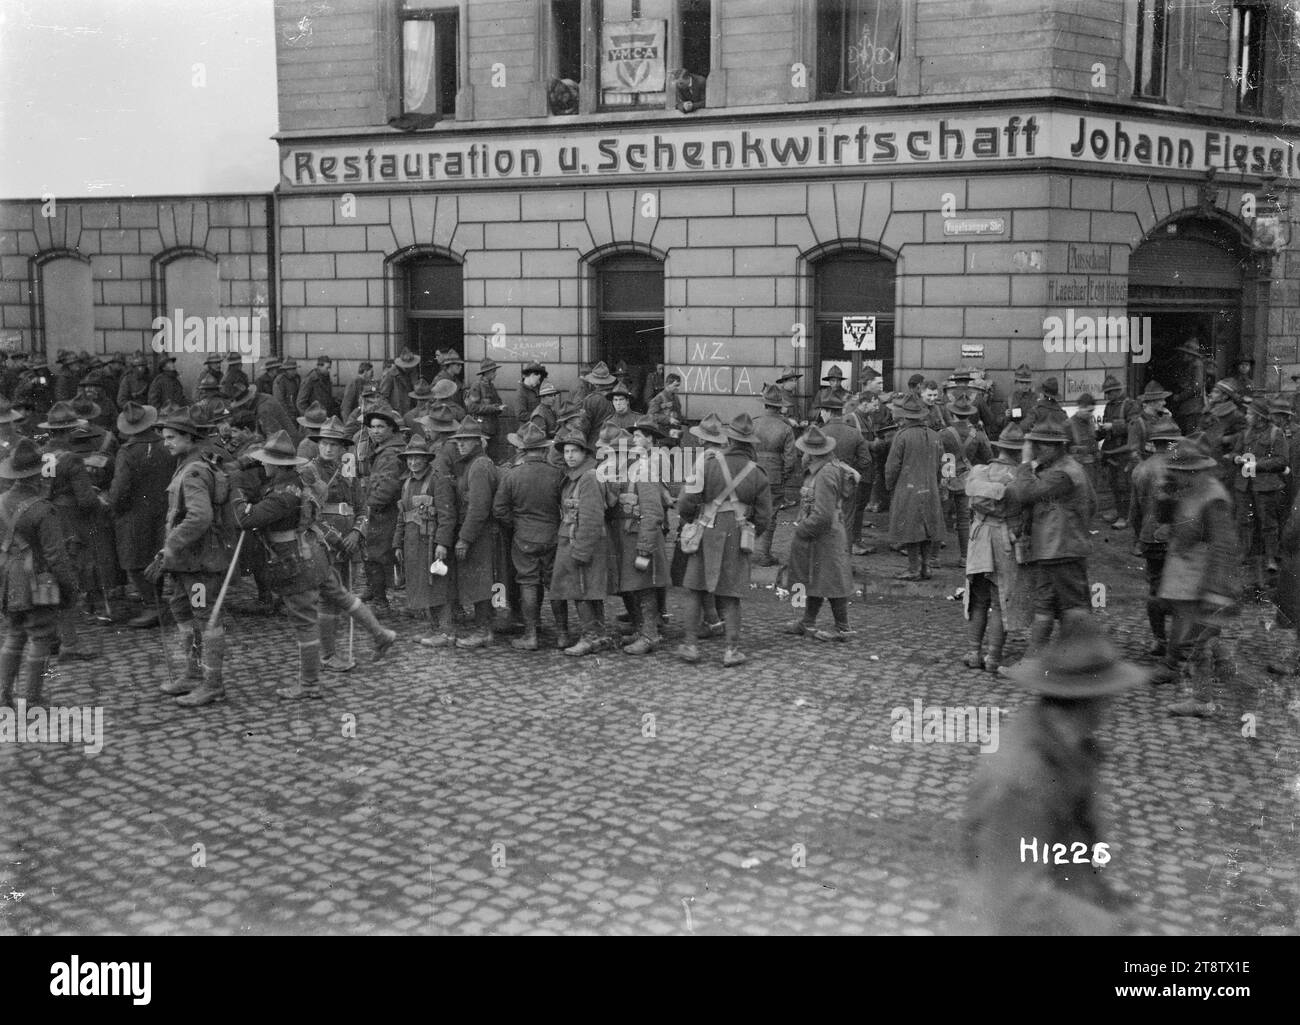 World War I New Zealand troops outside the YMCA in Ehrenfeld, Cologne, A large group of New Zealand soldiers shown mingling on the cobblestones outside the NZ YMCA in Ehrenfeld, a suburb of Cologne in Germany. YMCA notices appear on the window of a building with the German words 'Restauration u. Schenkwirtschaft Johann Fiessler?' on it. 'NZ YMCA' is also written on the wall. Photograph taken after the end of World War I, probably December 1918 Stock Photo